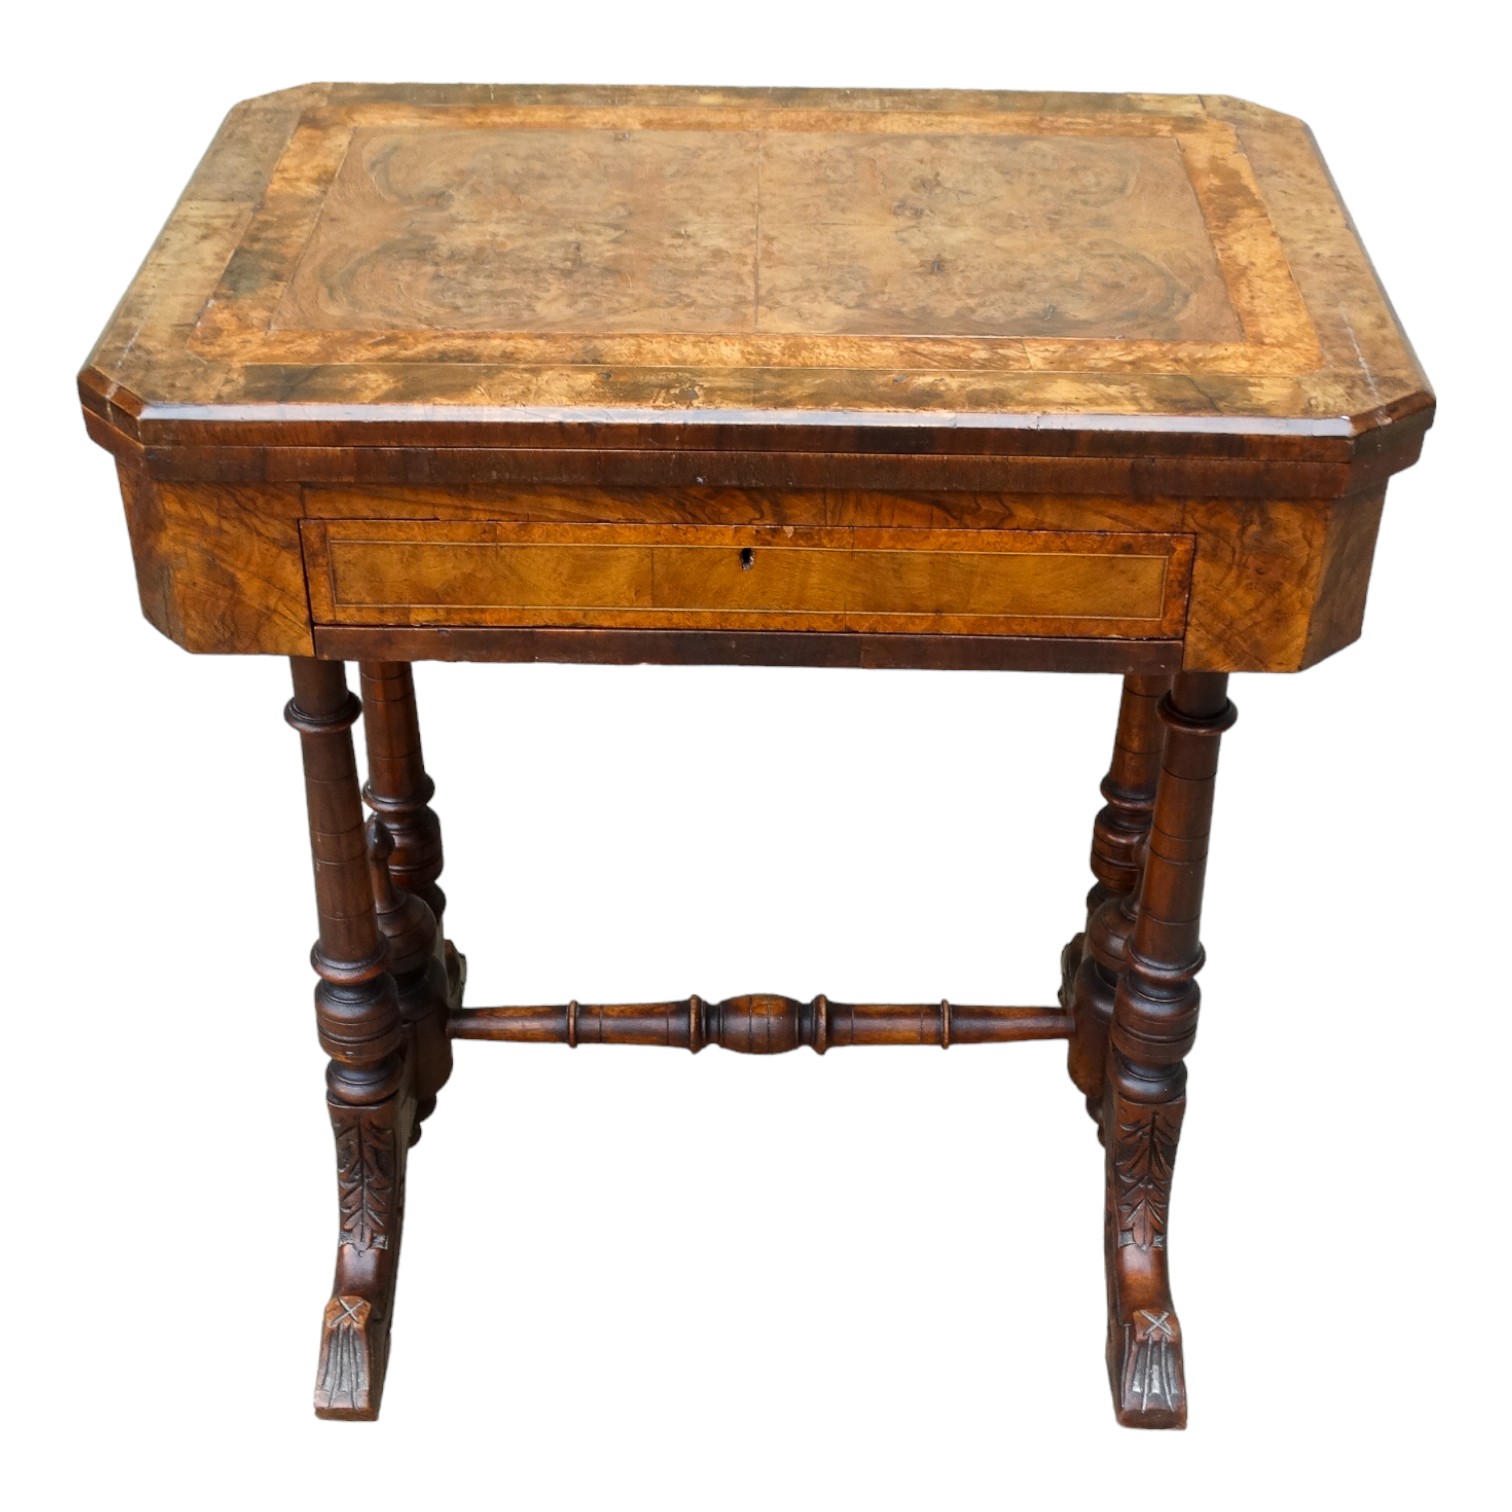 A Victorian walnut games and work table - the hinged rectangular top with canted corners opening